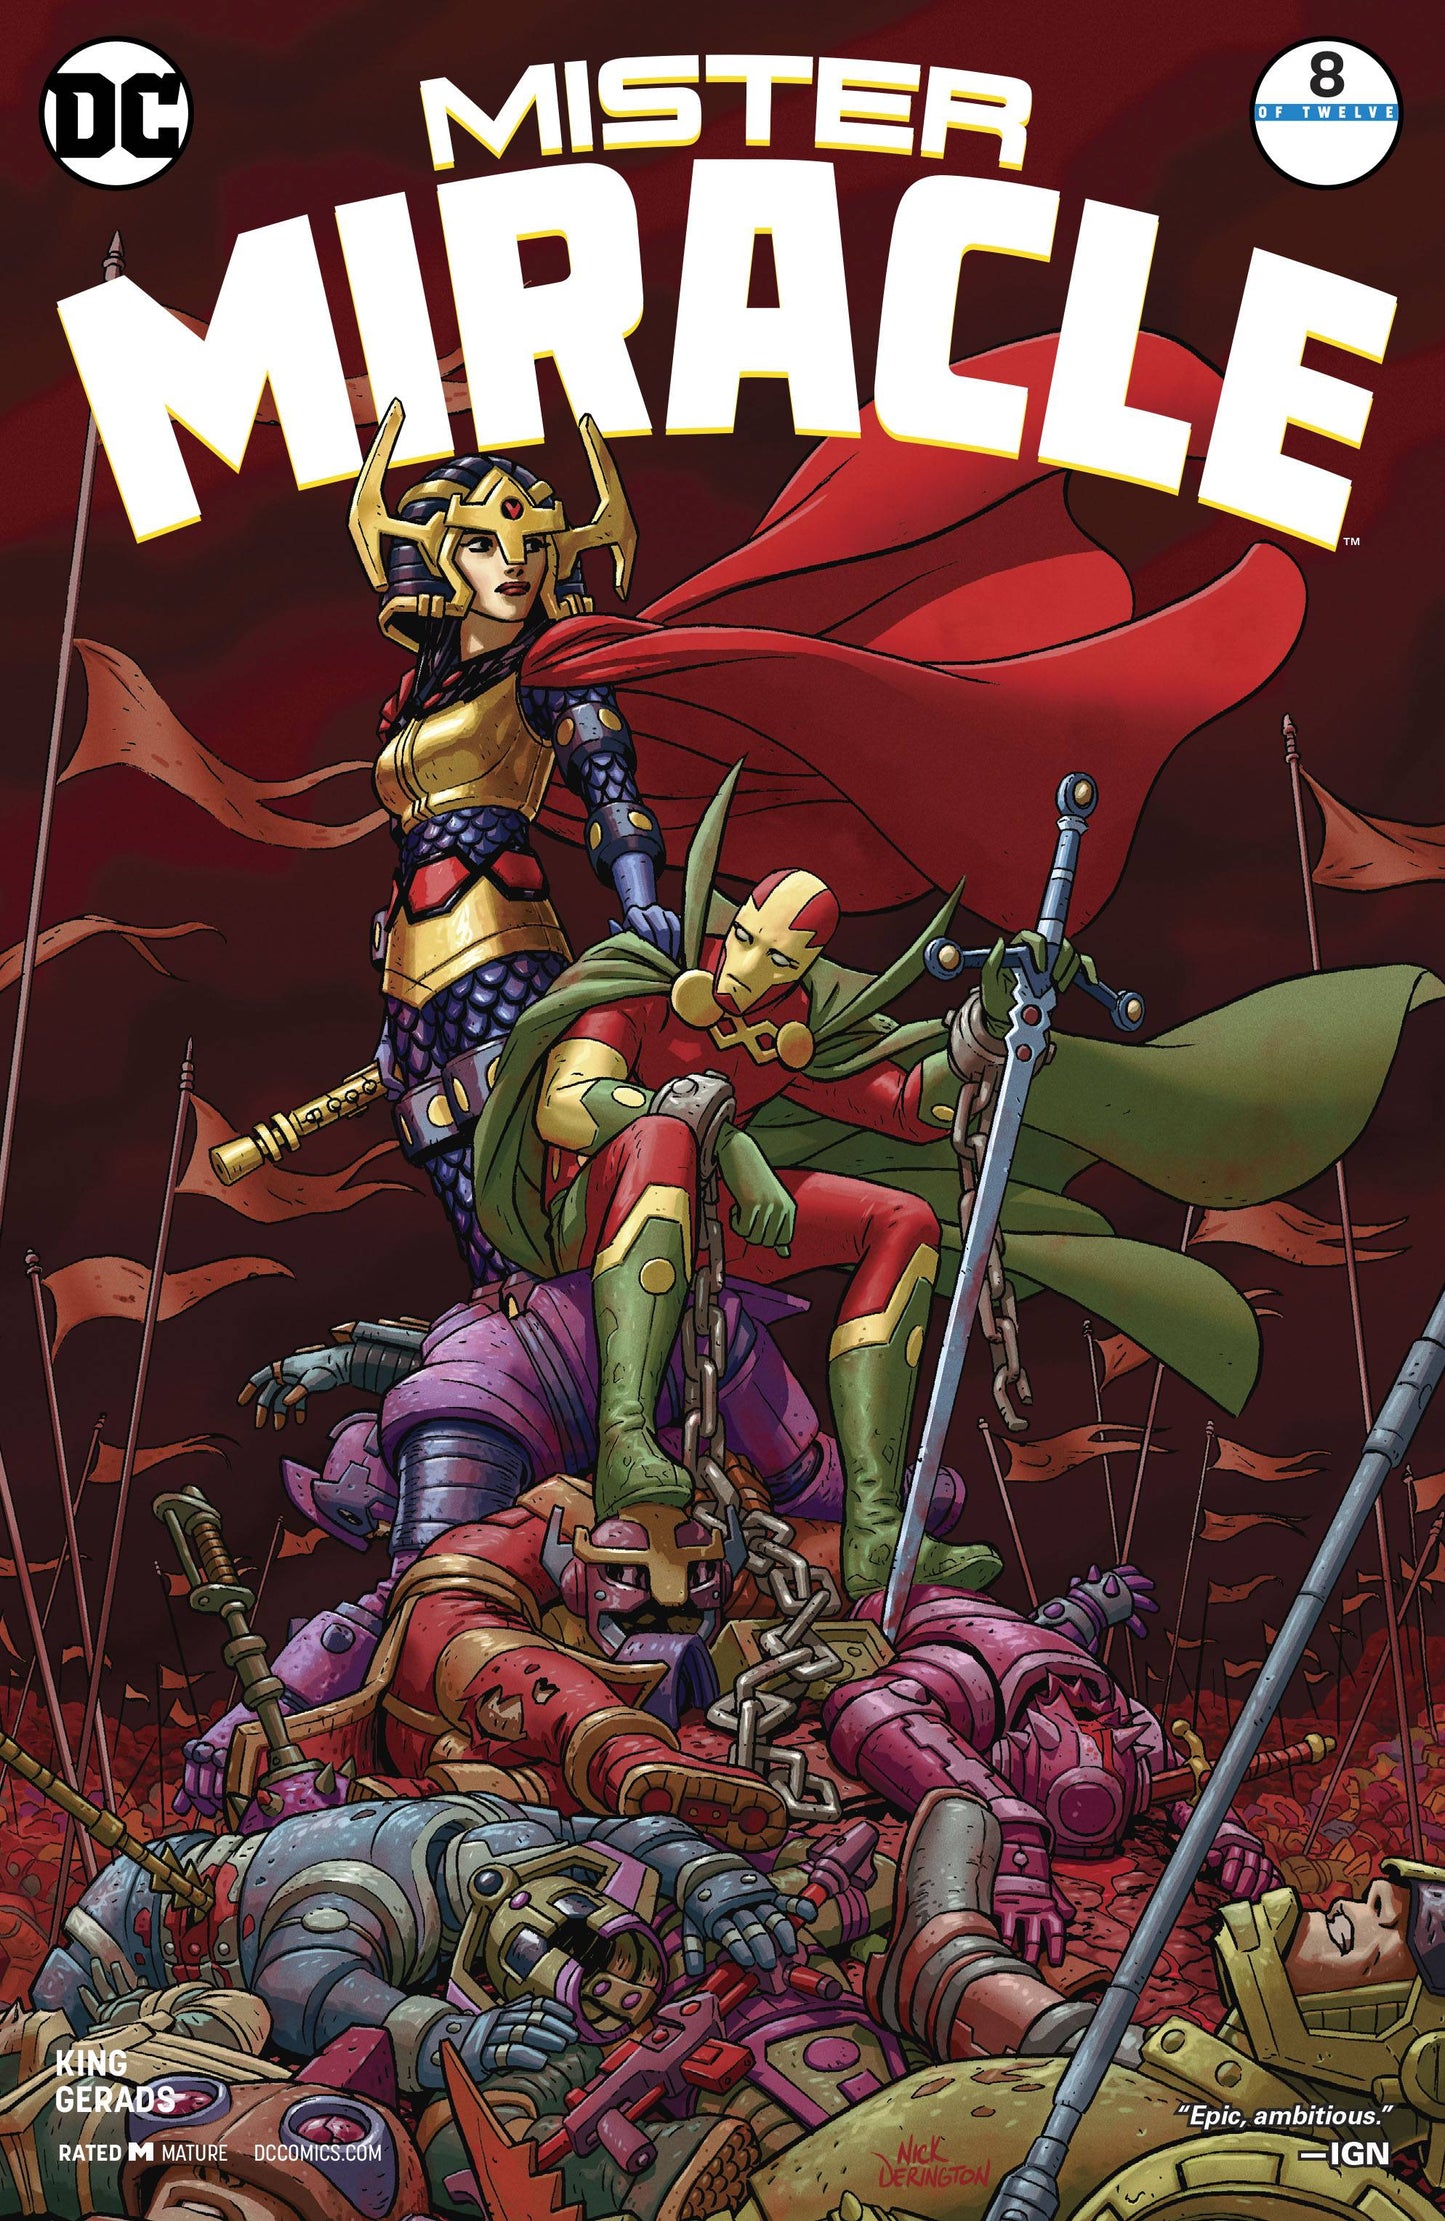 MISTER MIRACLE #8 (OF 12) 2018